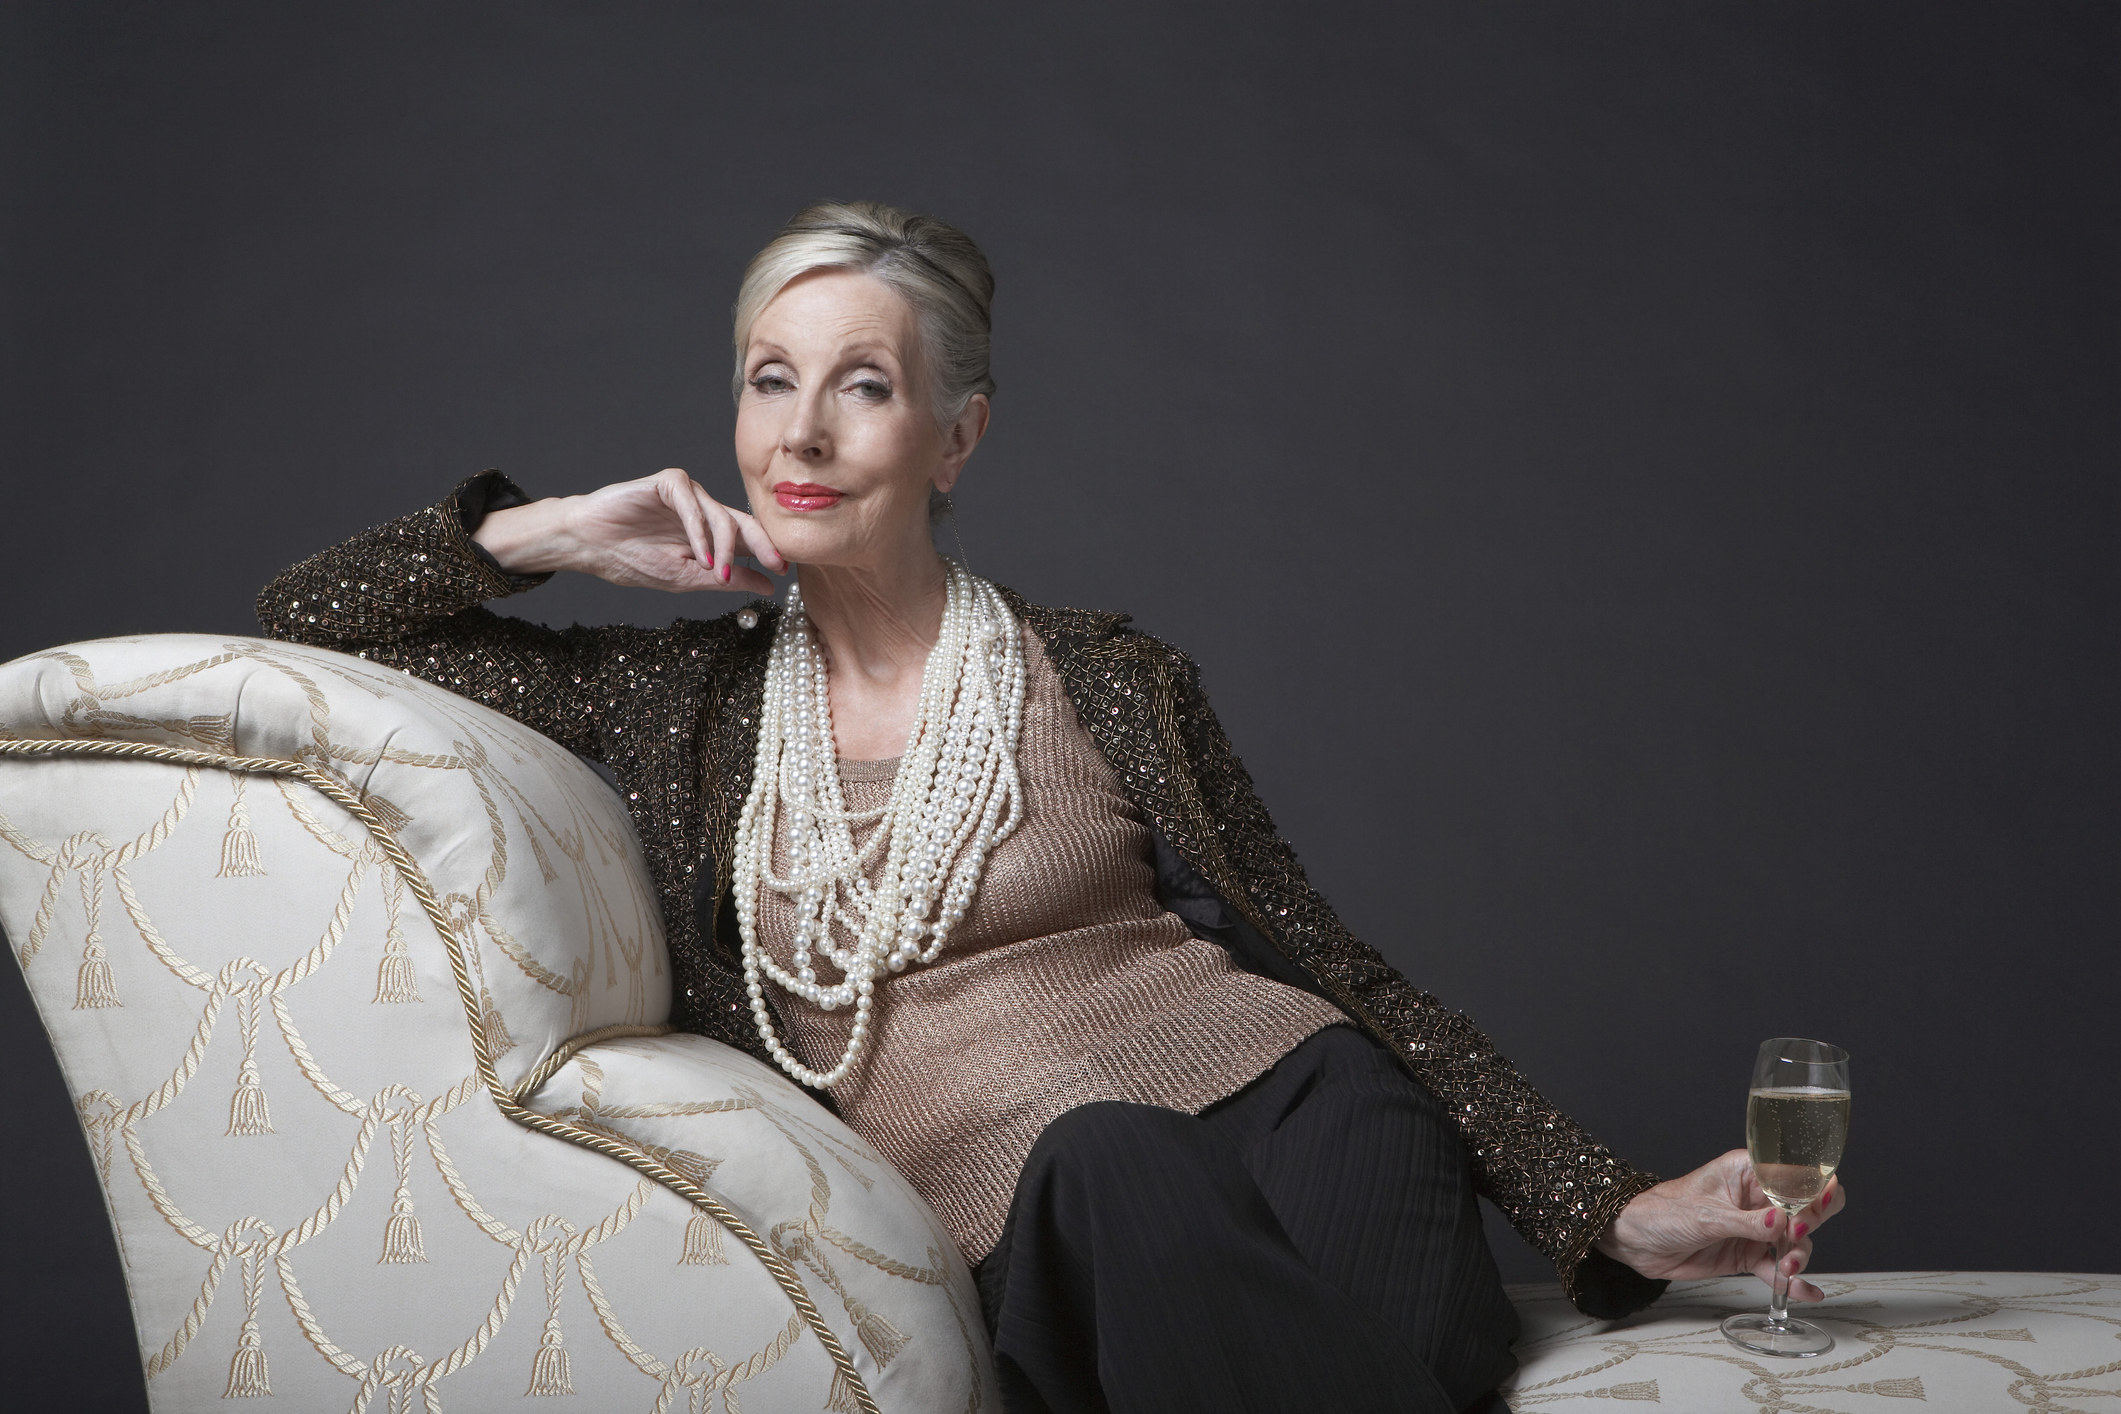 A woman sitting on a chaise lounge with a glass of champagne in her hand and pearls around her neck